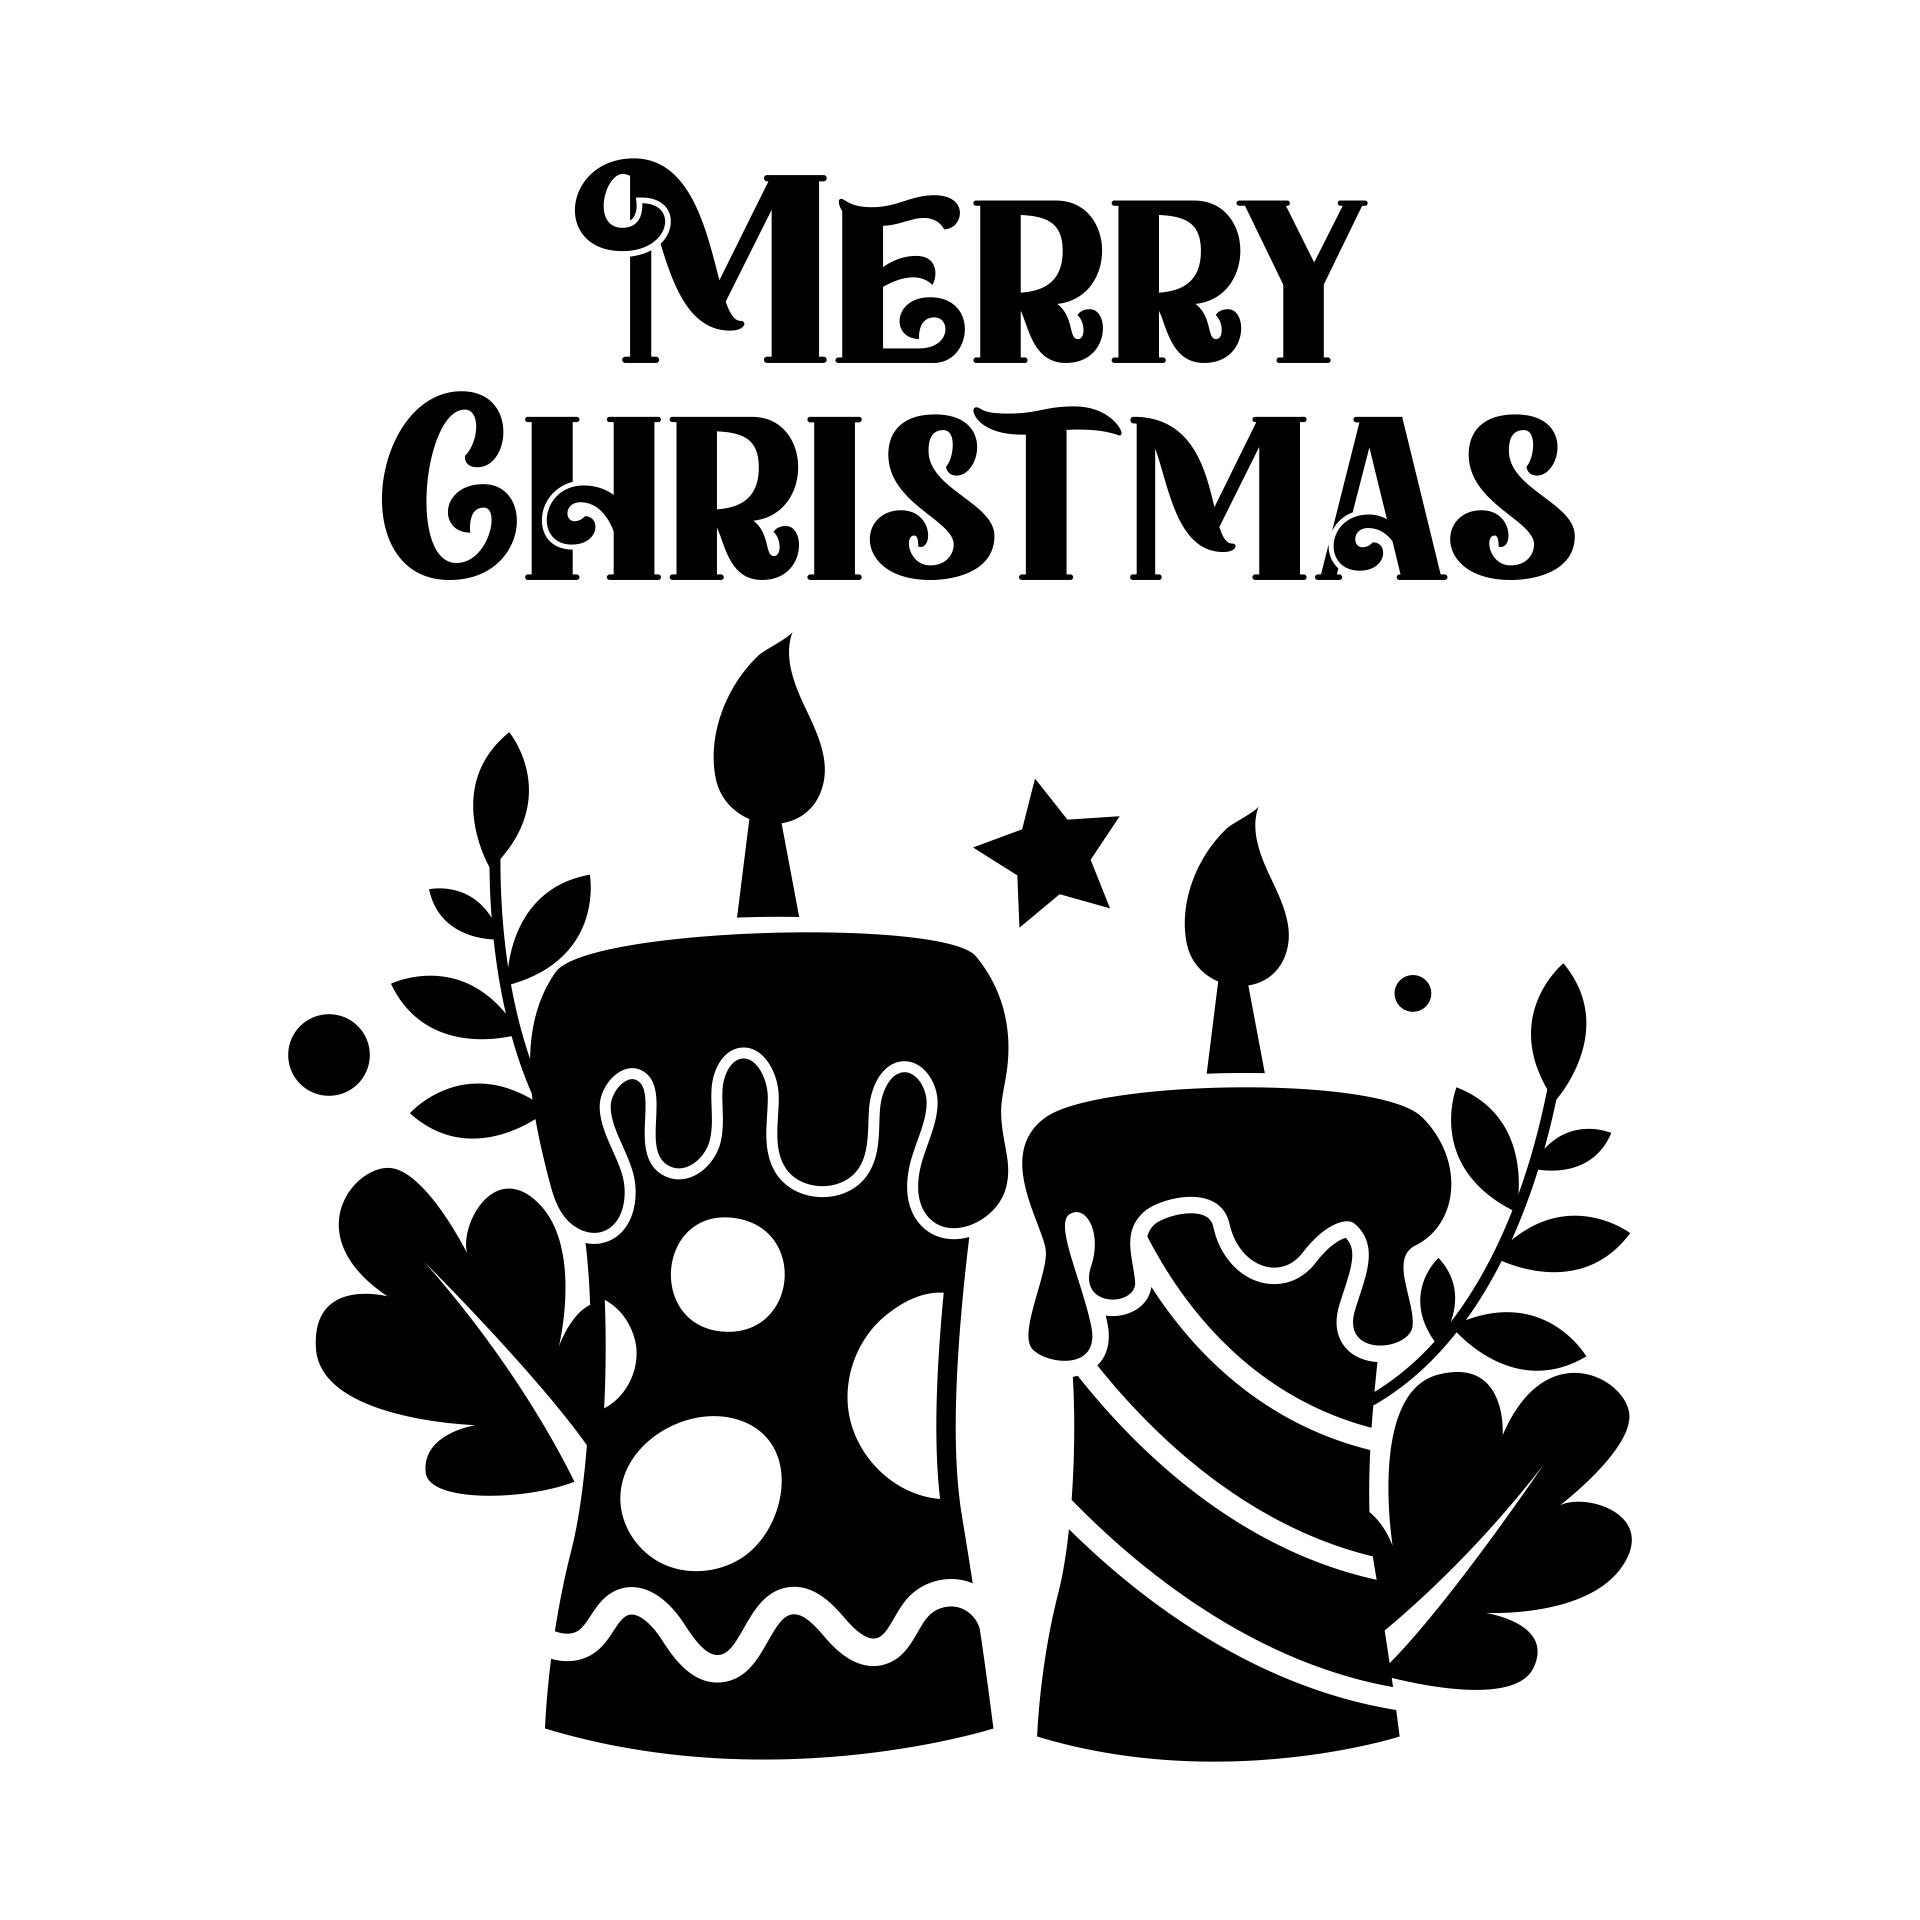 Merry Christmas Candles Printable Stencil